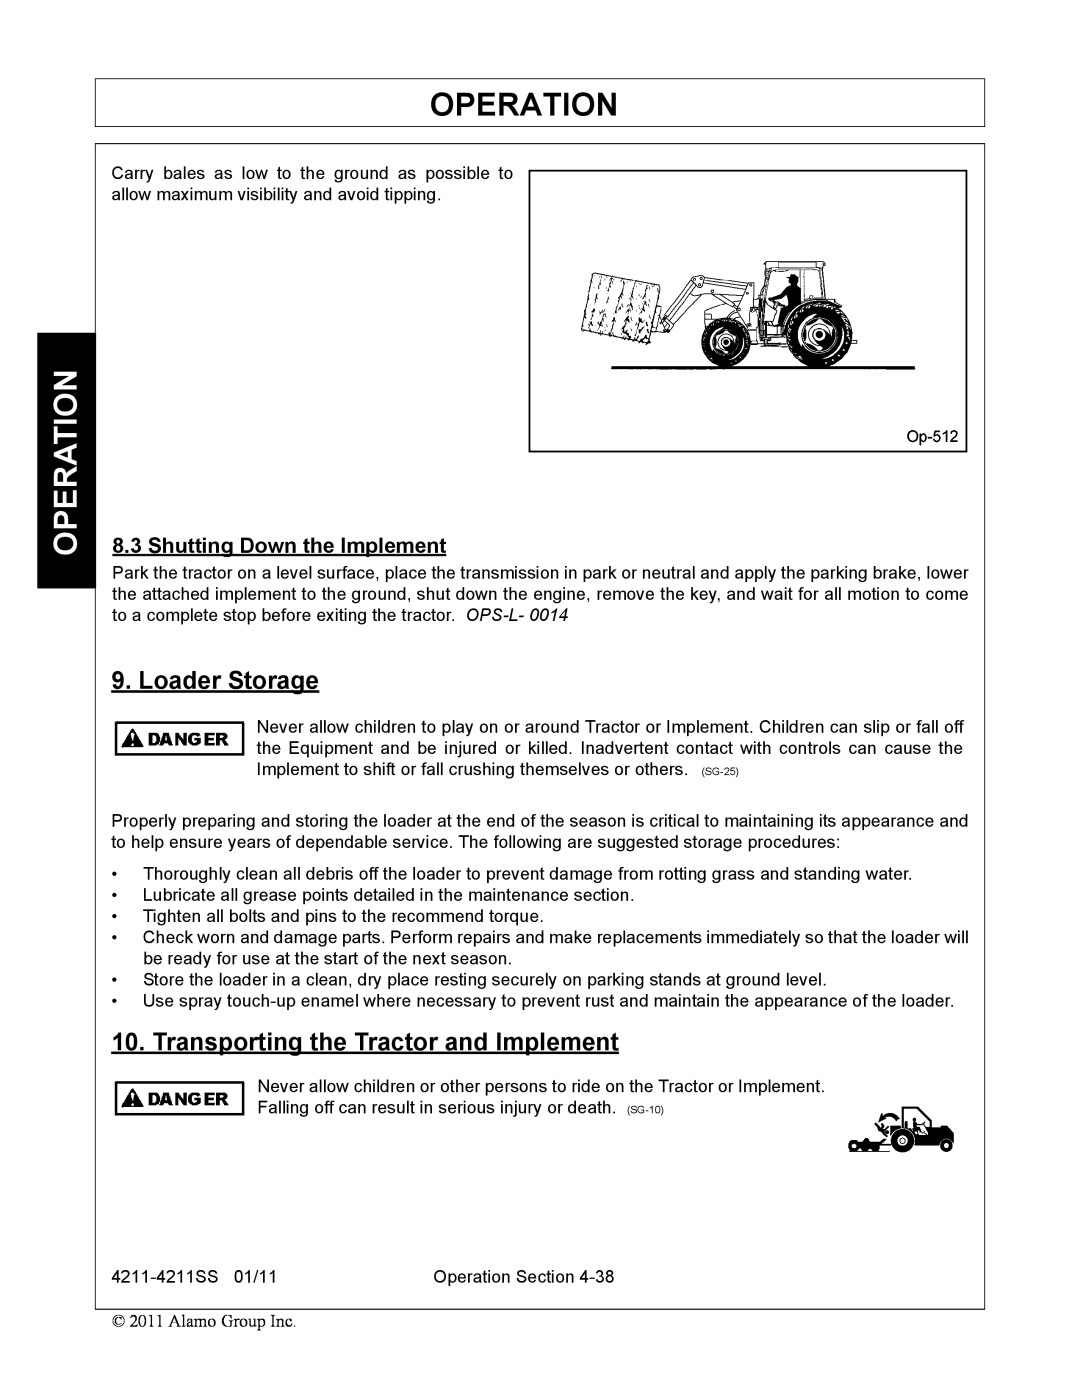 Servis-Rhino 4211SS manual Operation, Loader Storage, Transporting the Tractor and Implement, Shutting Down the Implement 